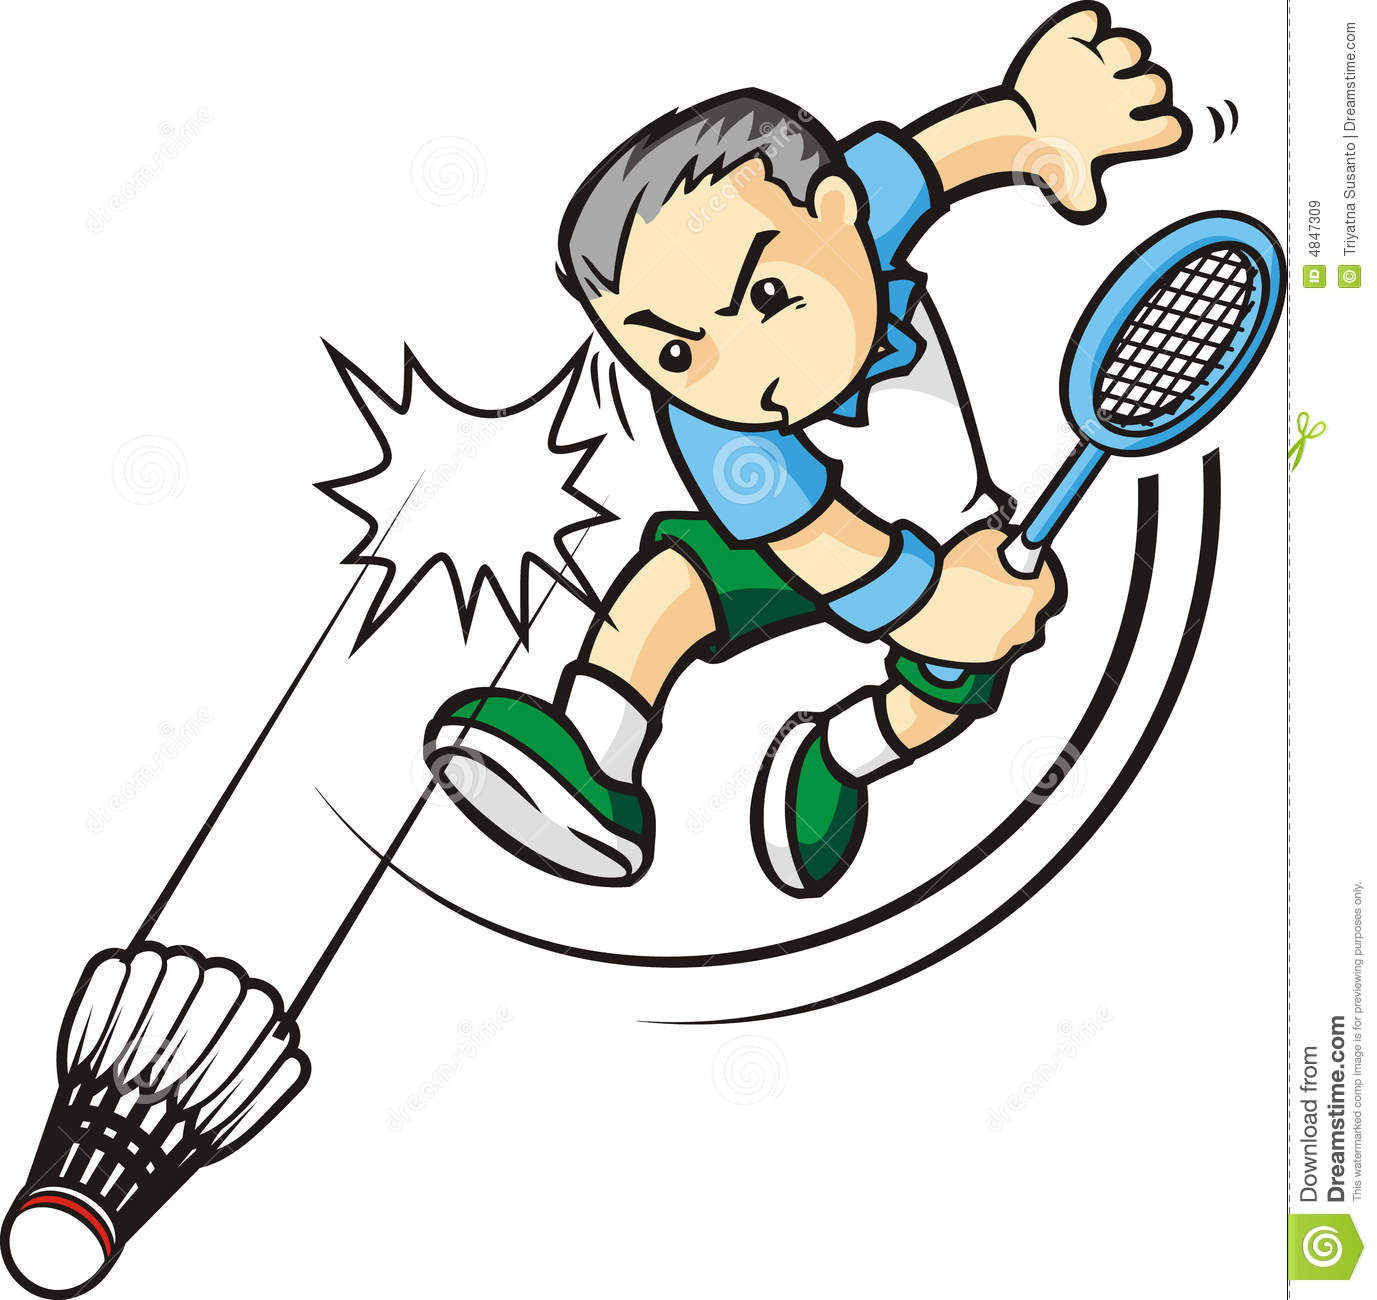 Cartoon Sport Royalty Free Stock Images   Image  4847309